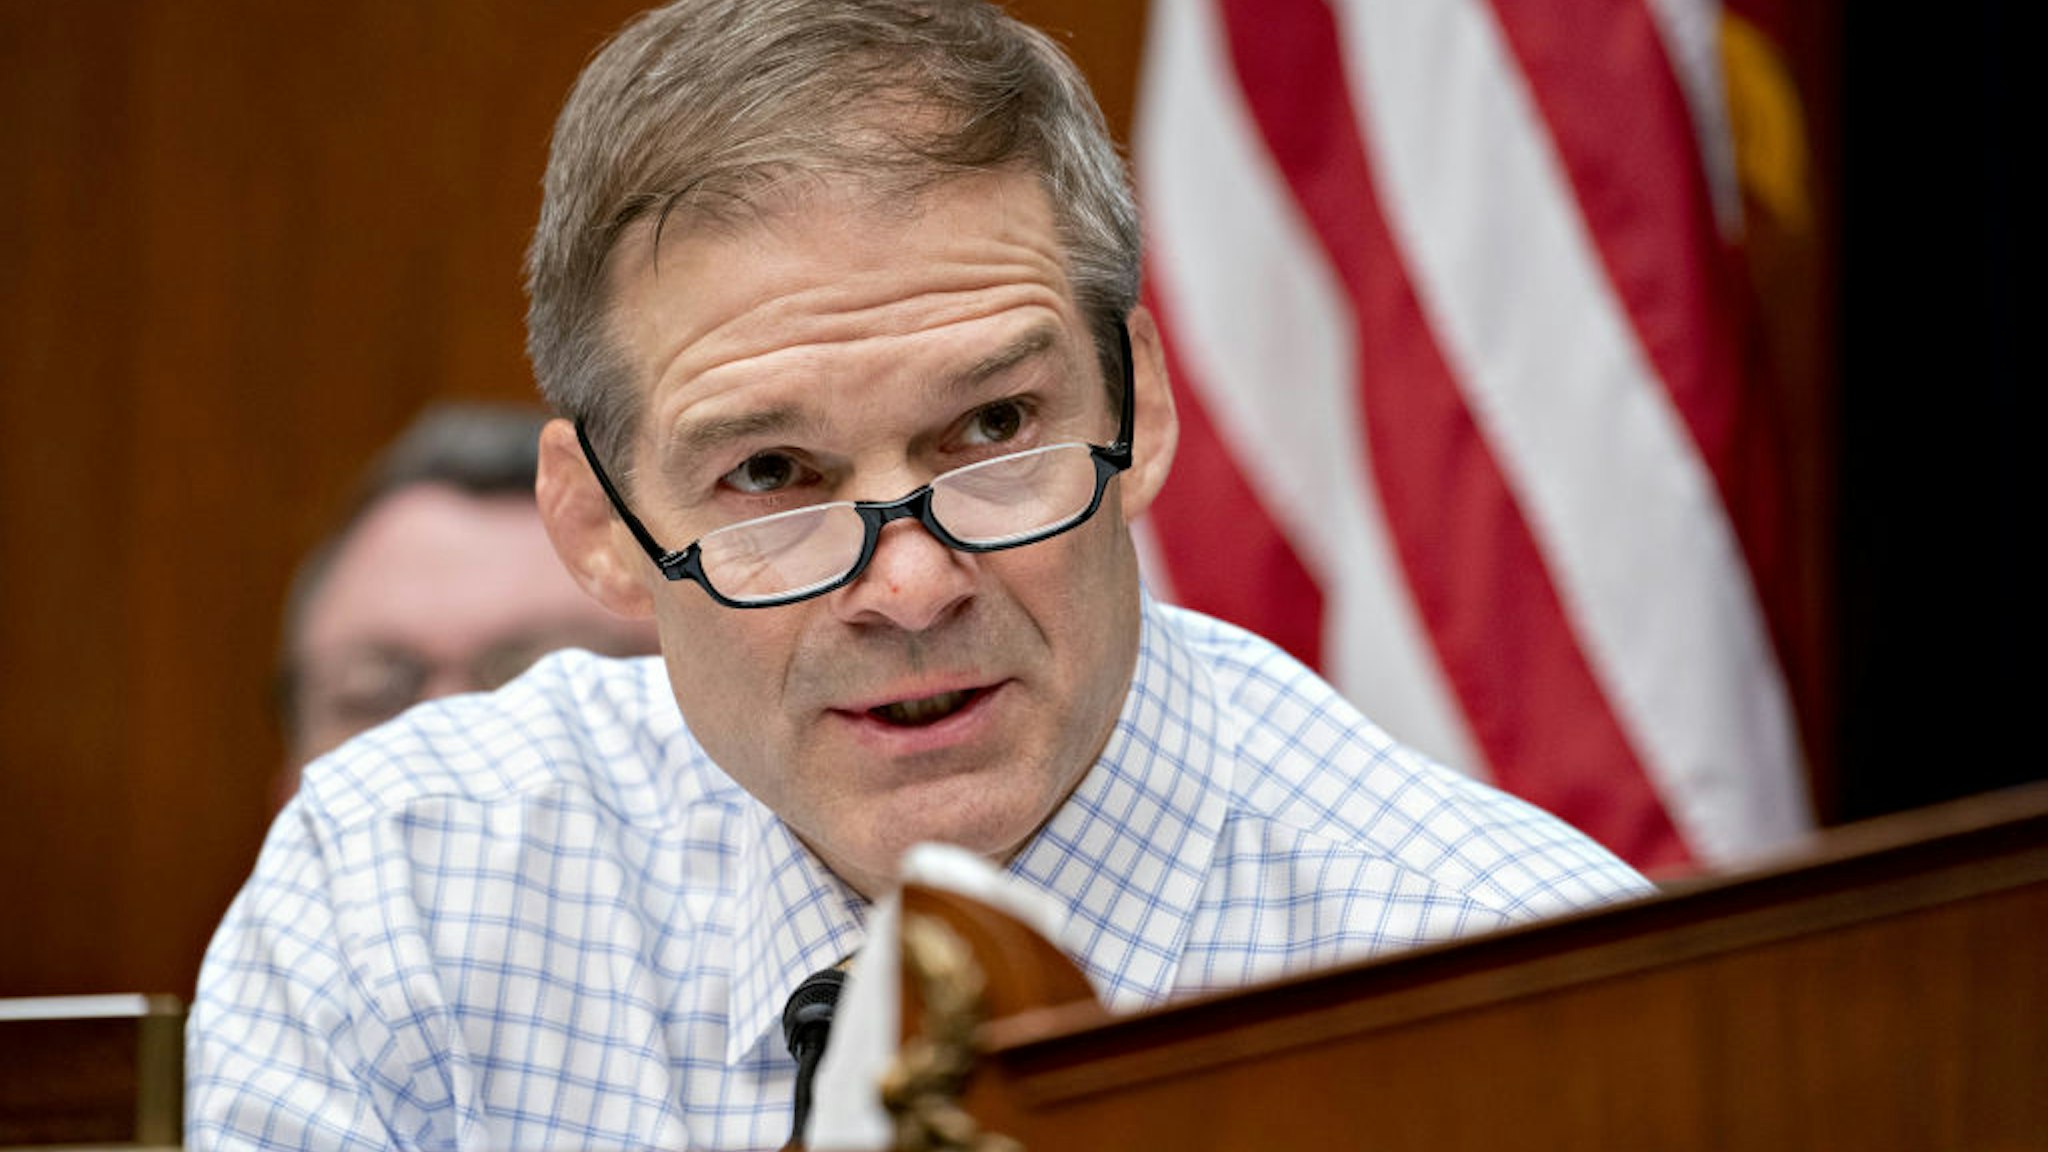 Representative Jim Jordan, a Republican from Ohio and ranking member of the House Oversight Committee, makes an opening statement during a hearing in Washington, D.C., U.S., on Wednesday, March 11, 2020.